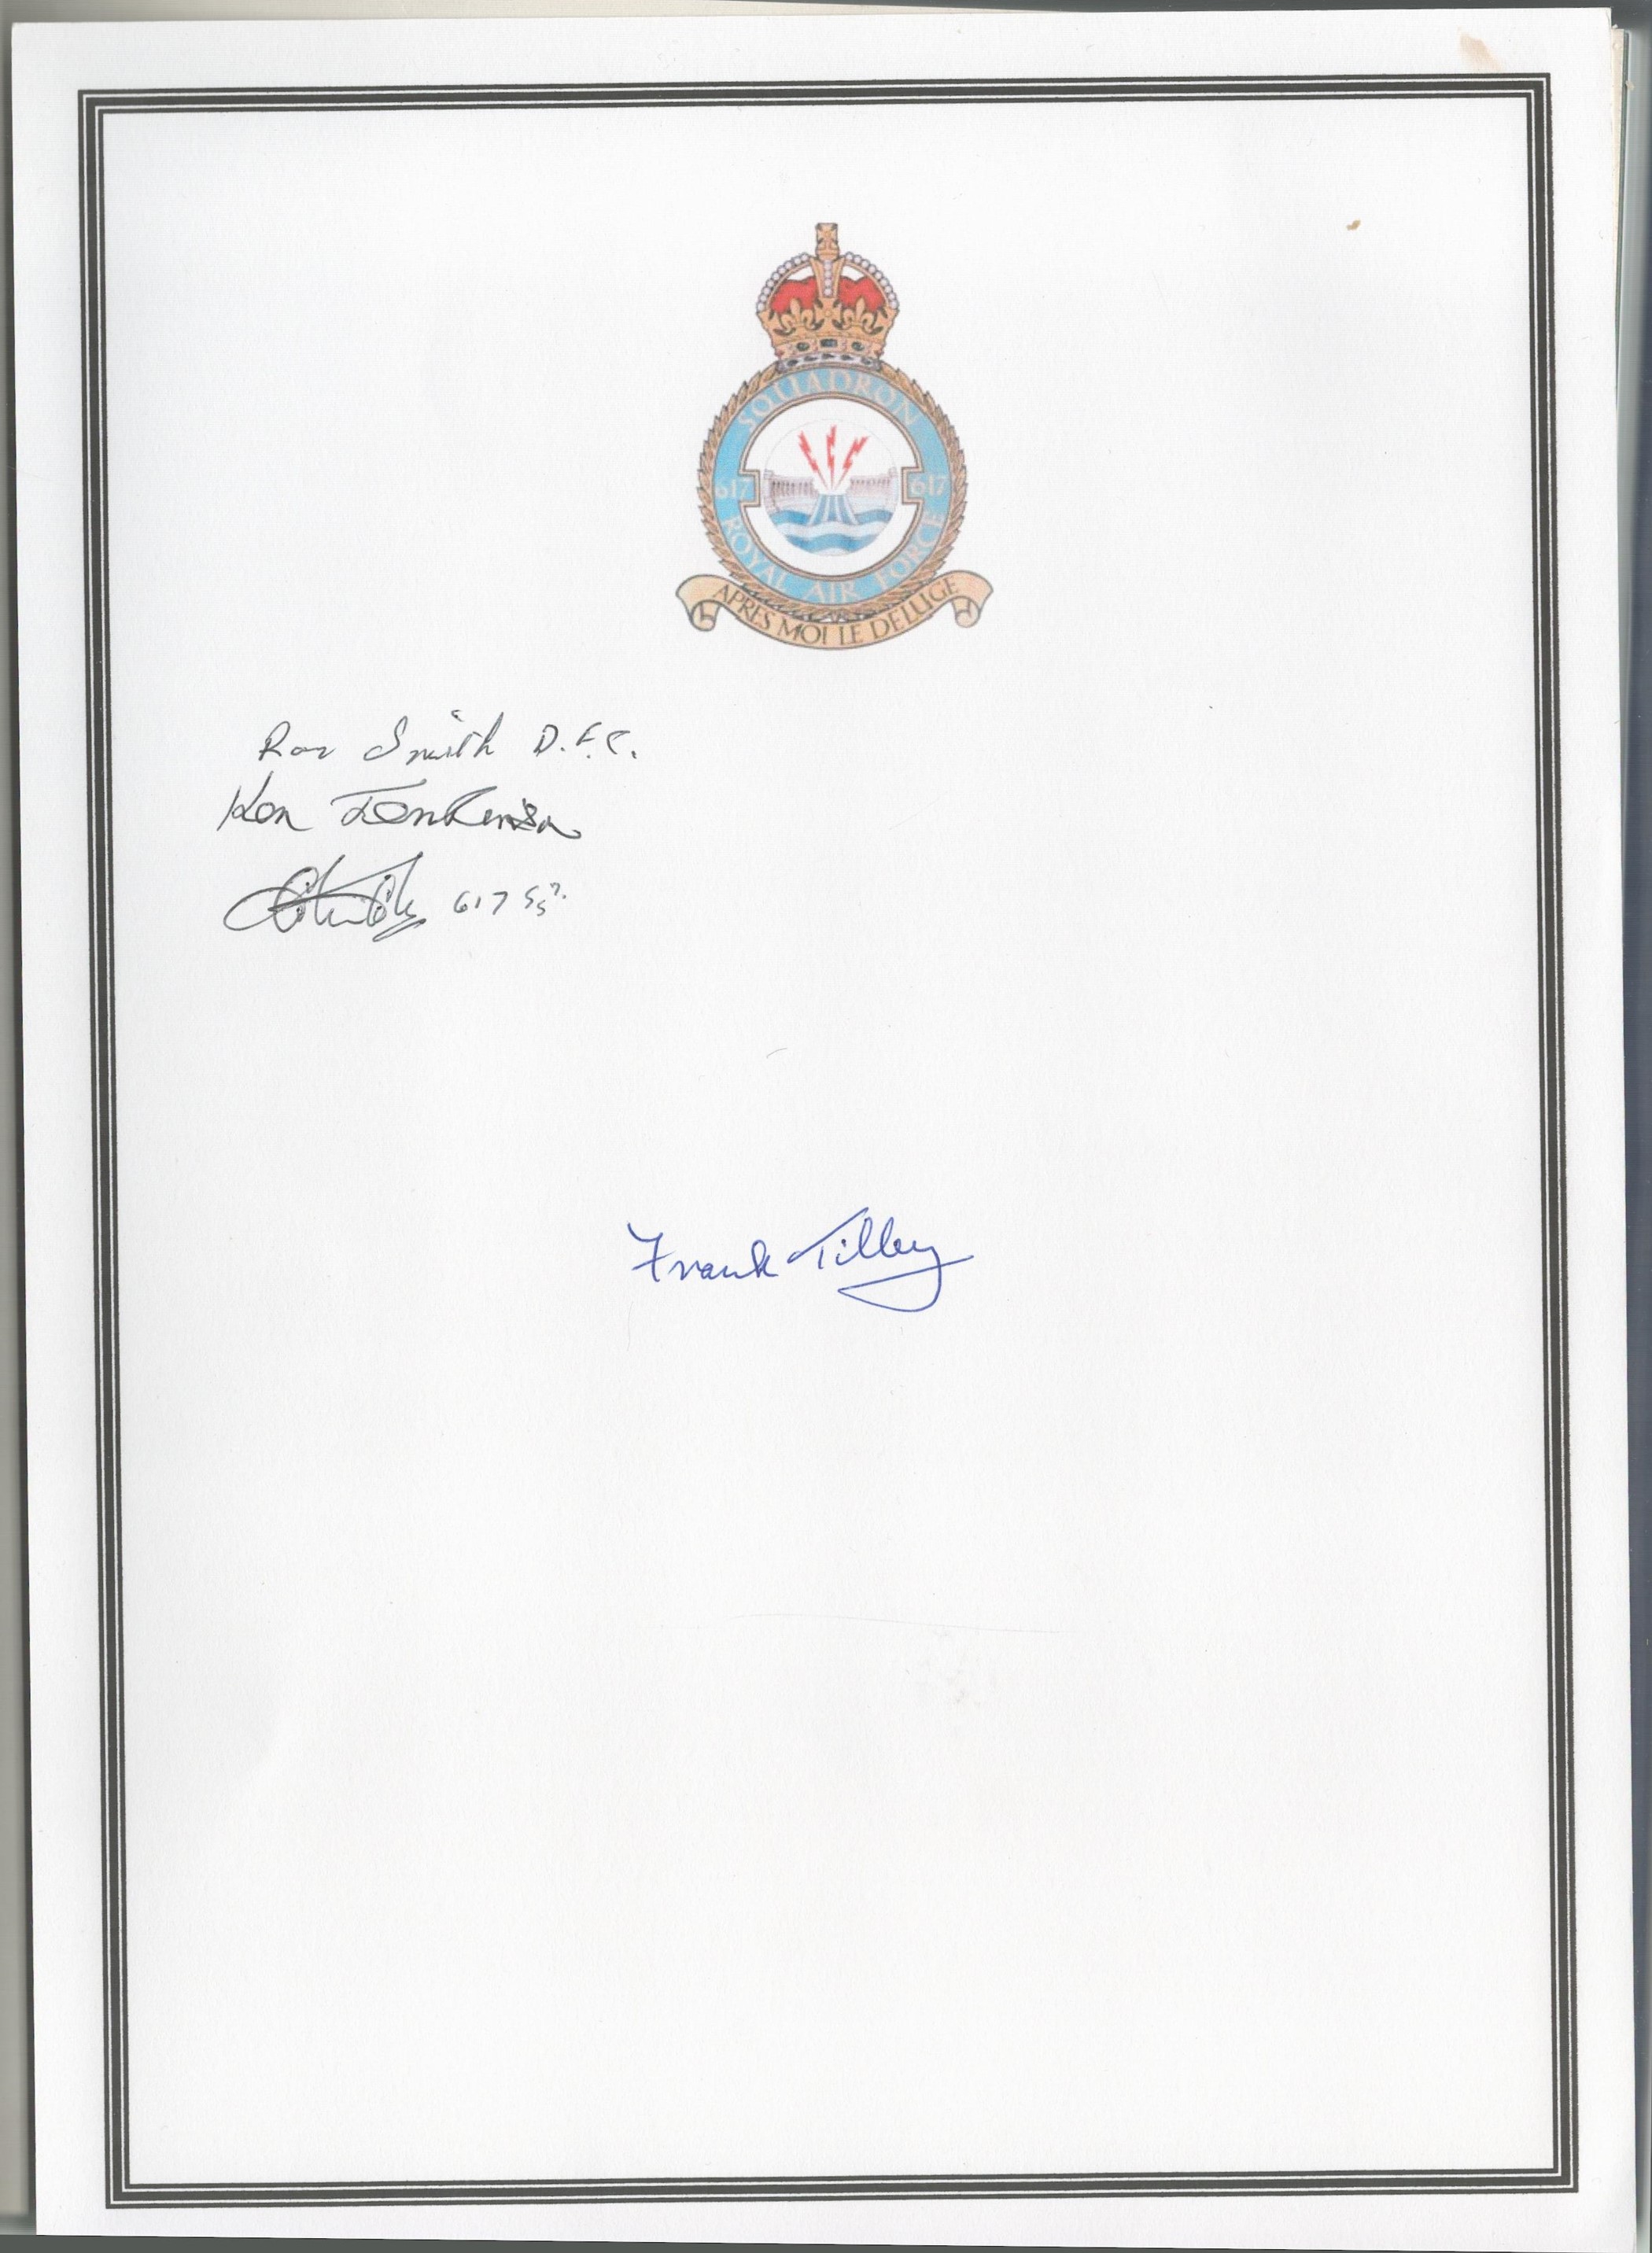 Dambusters Colin Cole, Frank Tilley, Ron Smith and Ken Jenkinson Signed RAF Bookplate loosely - Image 2 of 3